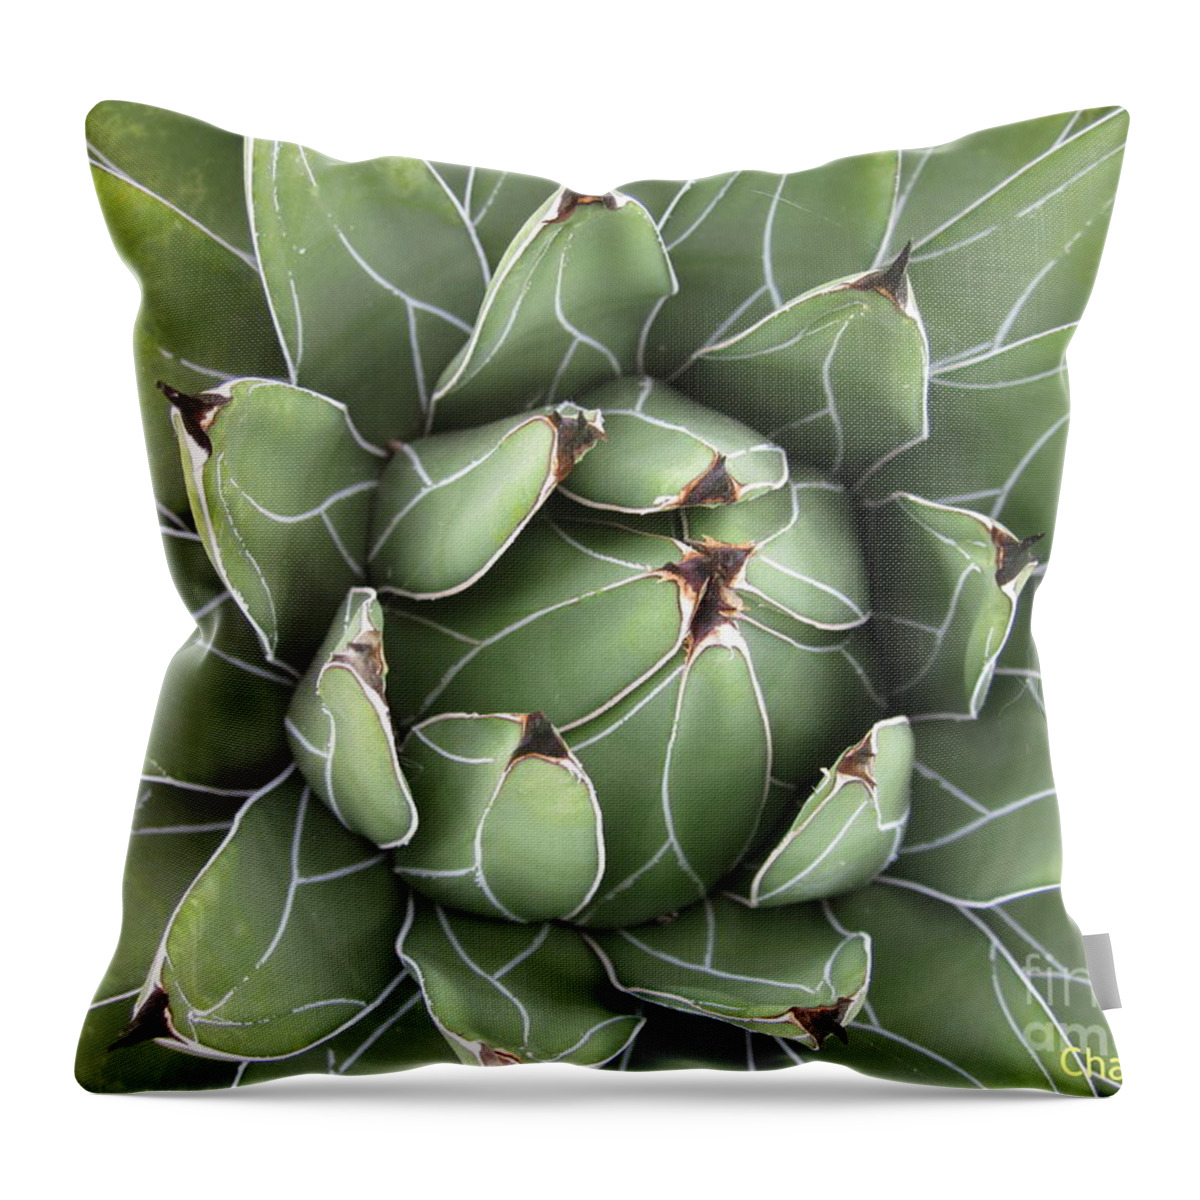 Agave Throw Pillow featuring the photograph Agave by Chani Demuijlder